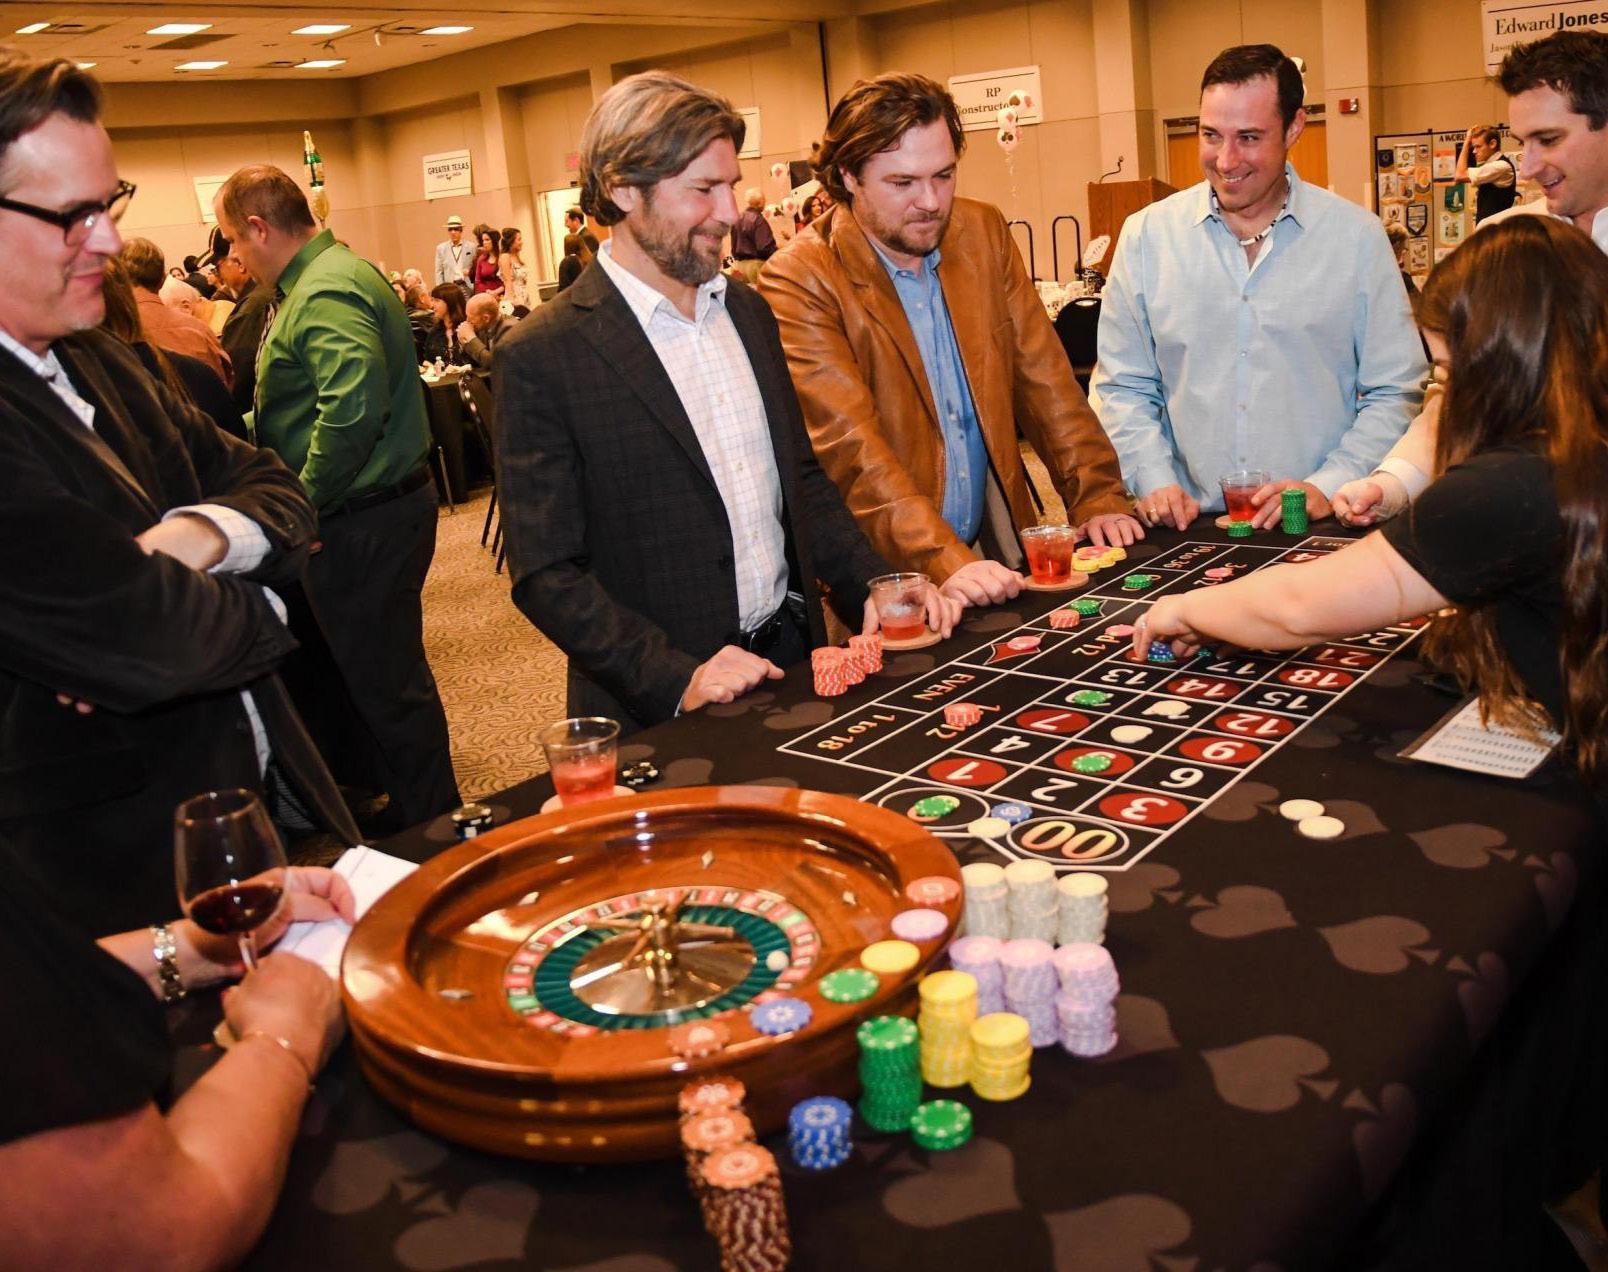 Casino Night fundraiser seeks to raise money for local youth support